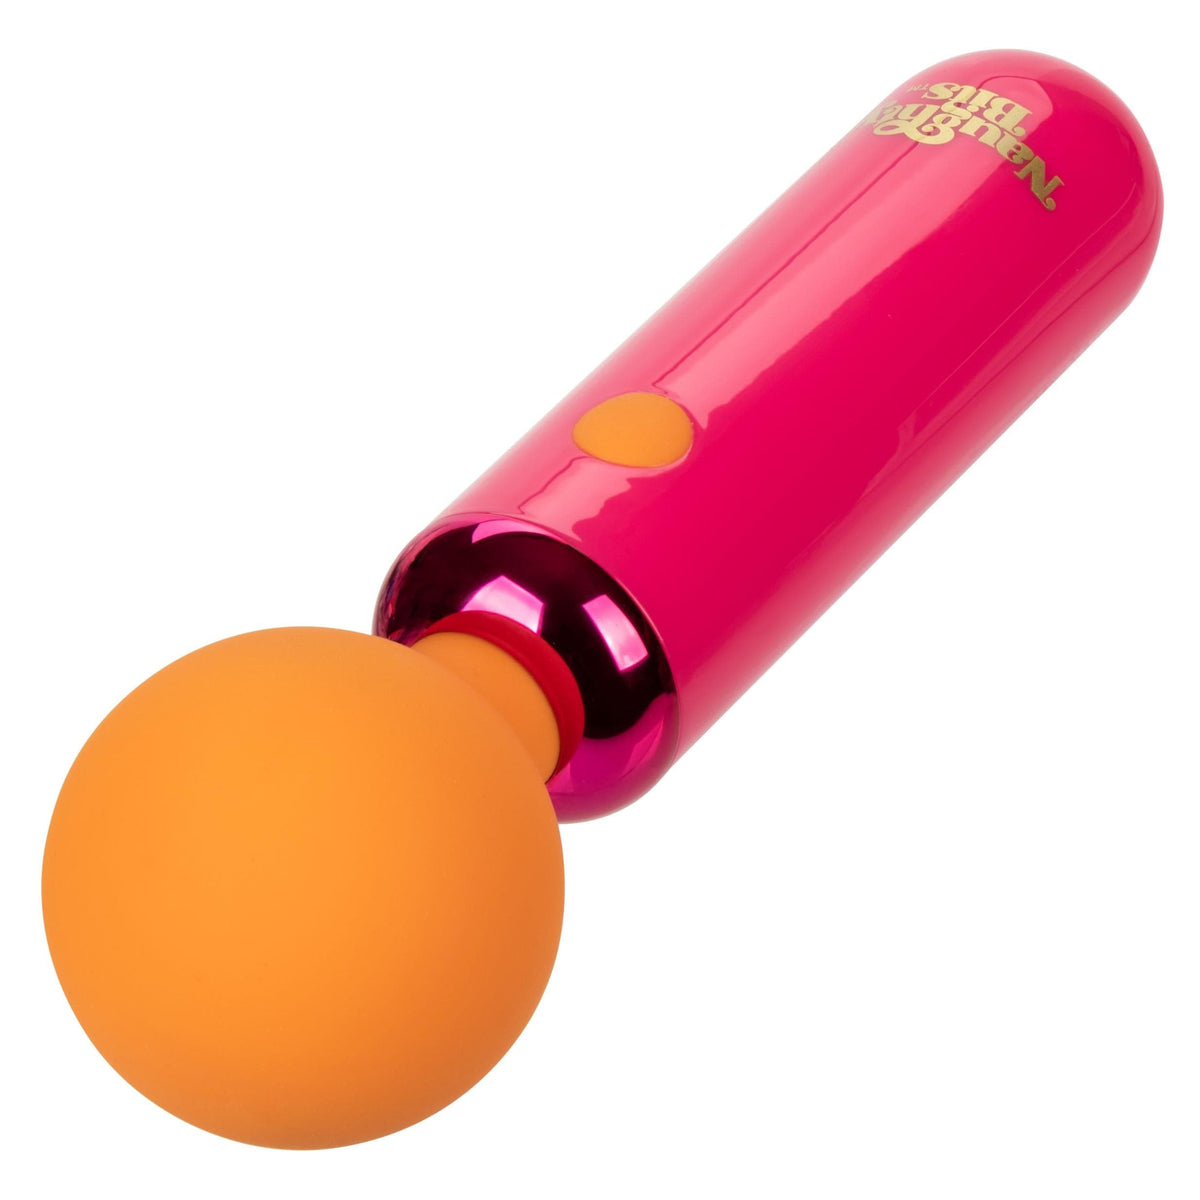 naughty bits home cumming queen vibrating wand orange pink